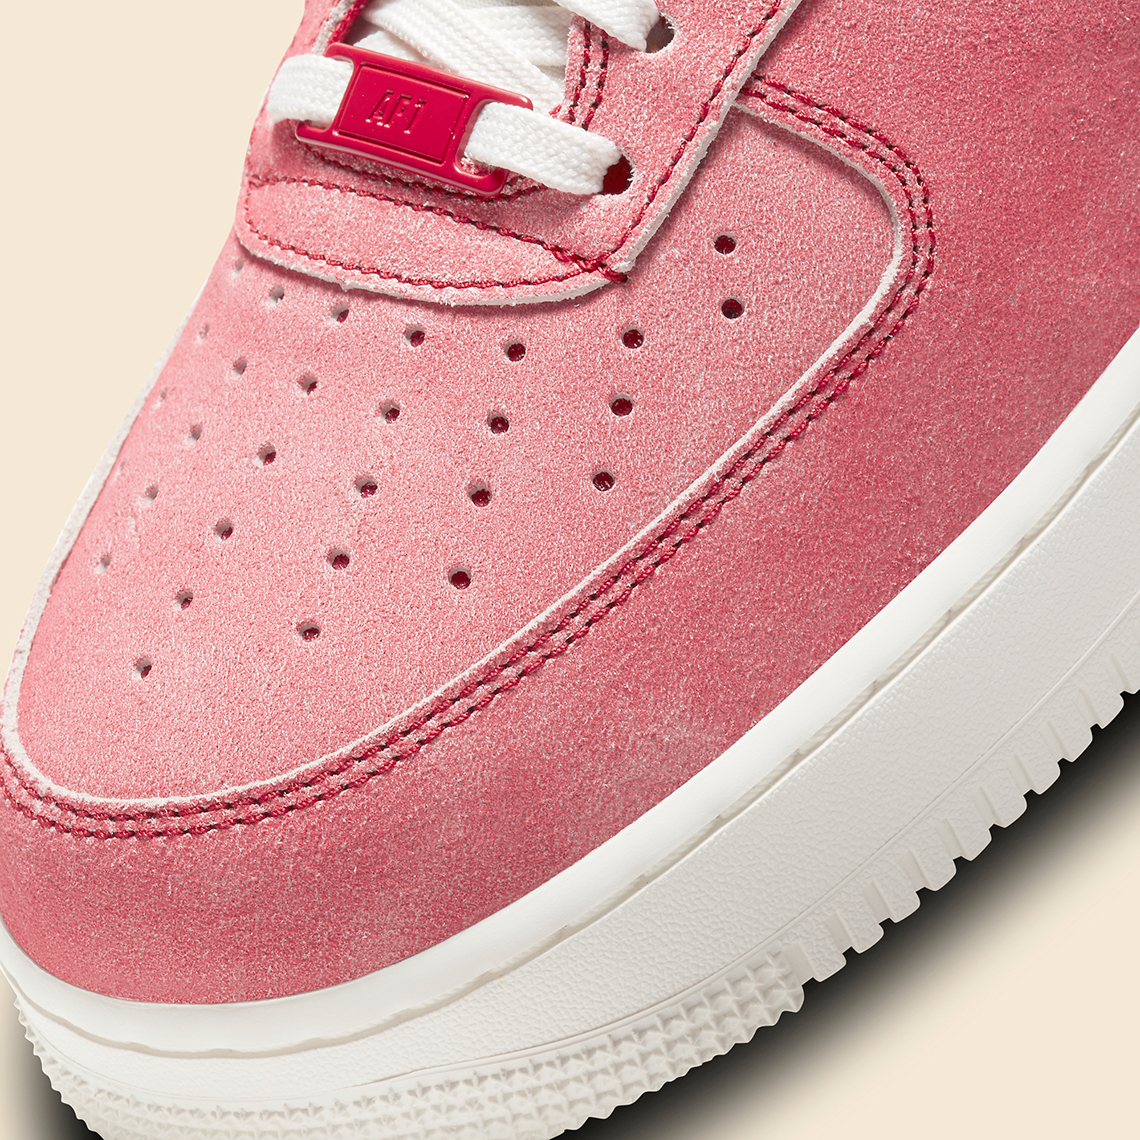 Nike Air Force 1 Low Suede Red DH0265-600 | SneakerNews.com